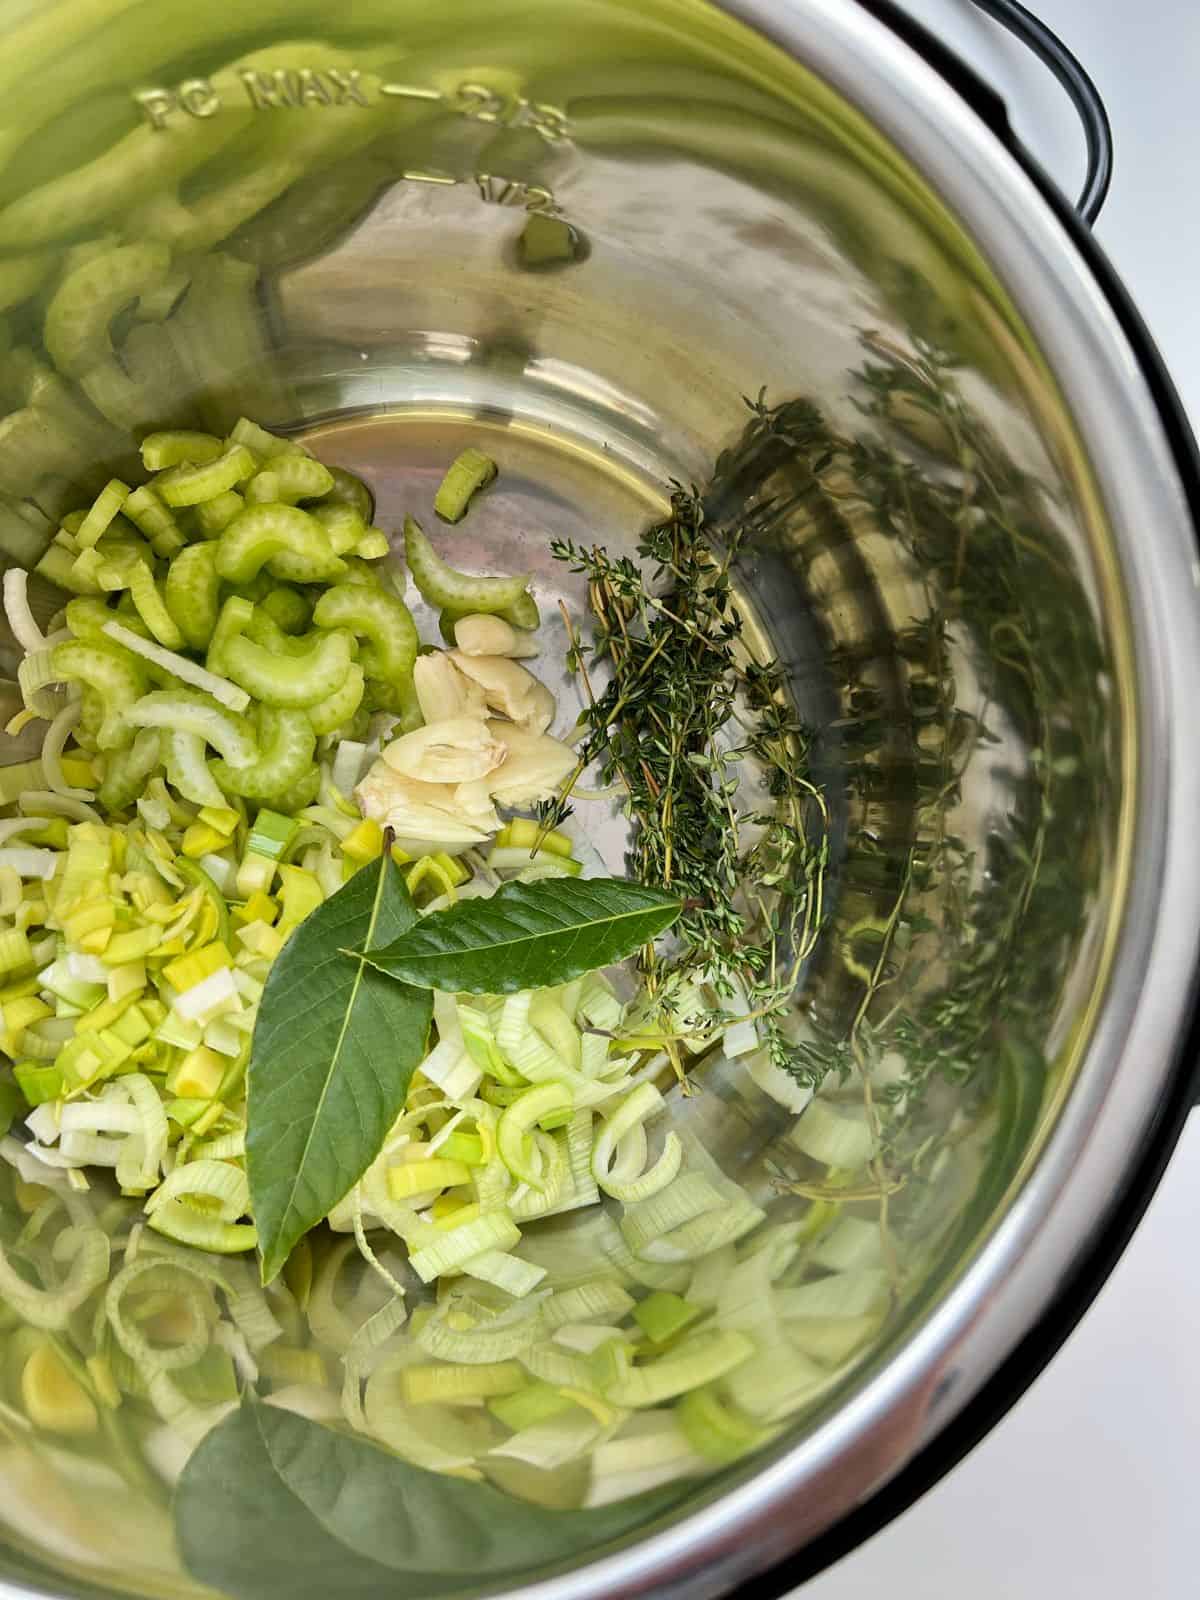 An image of the vegetable ingredients needed for Smoky Herbed Split Pea Soup in the stainless steel inner pot of an Instant Pot.